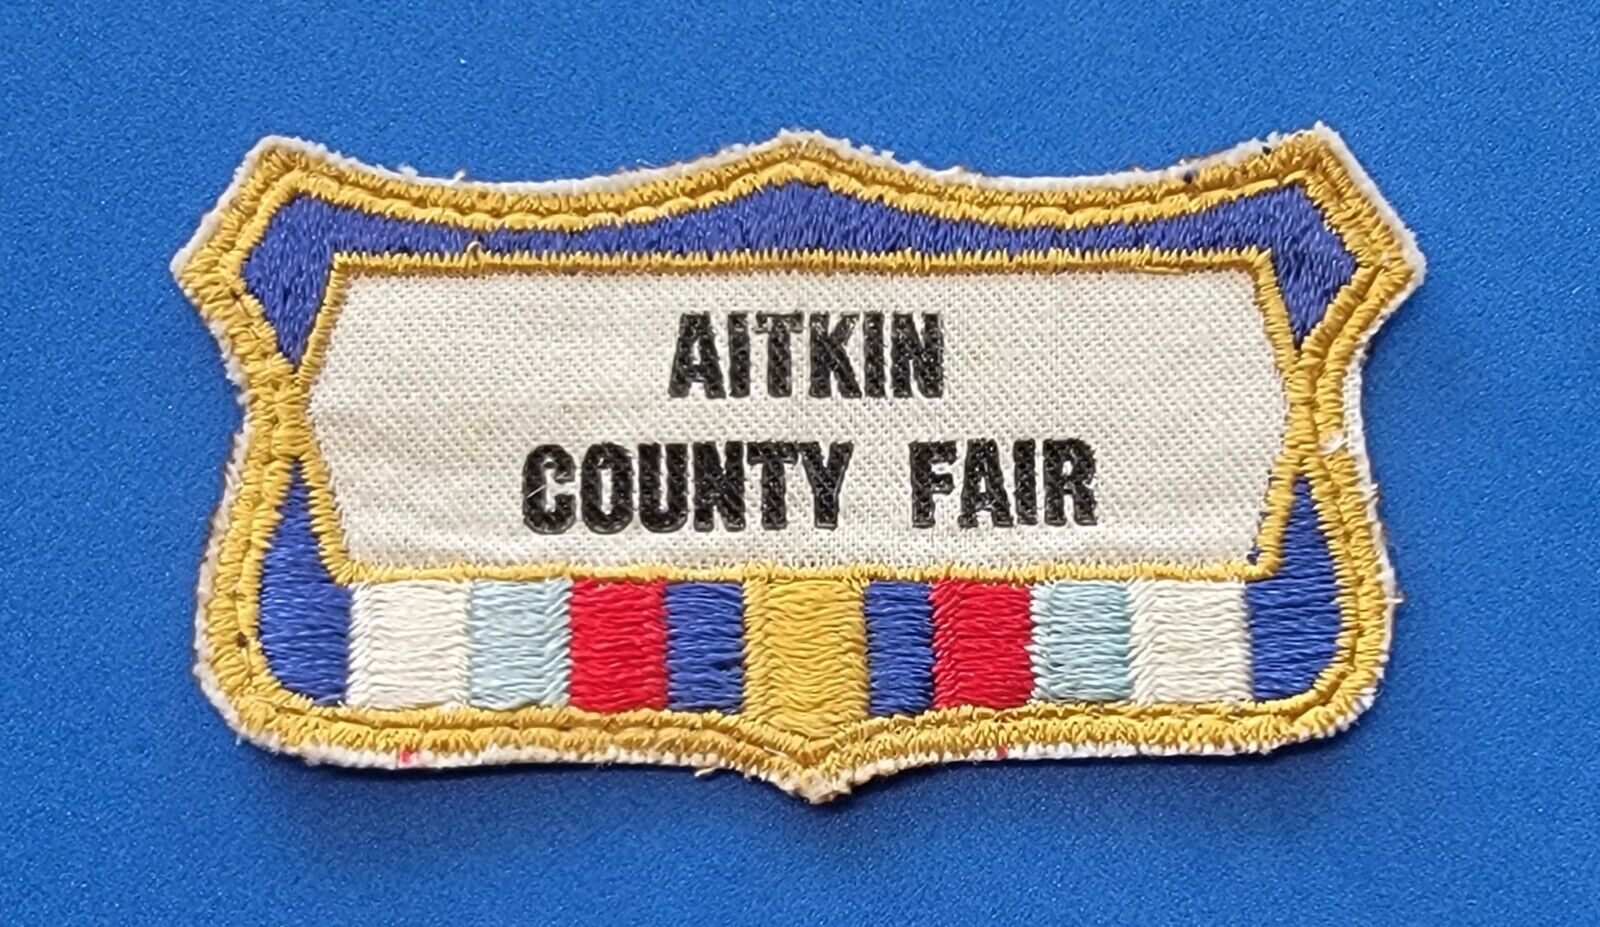 AITKIN COUNTY FAIR MINNESOTA BADGE PATCH VINTAGE NOS 